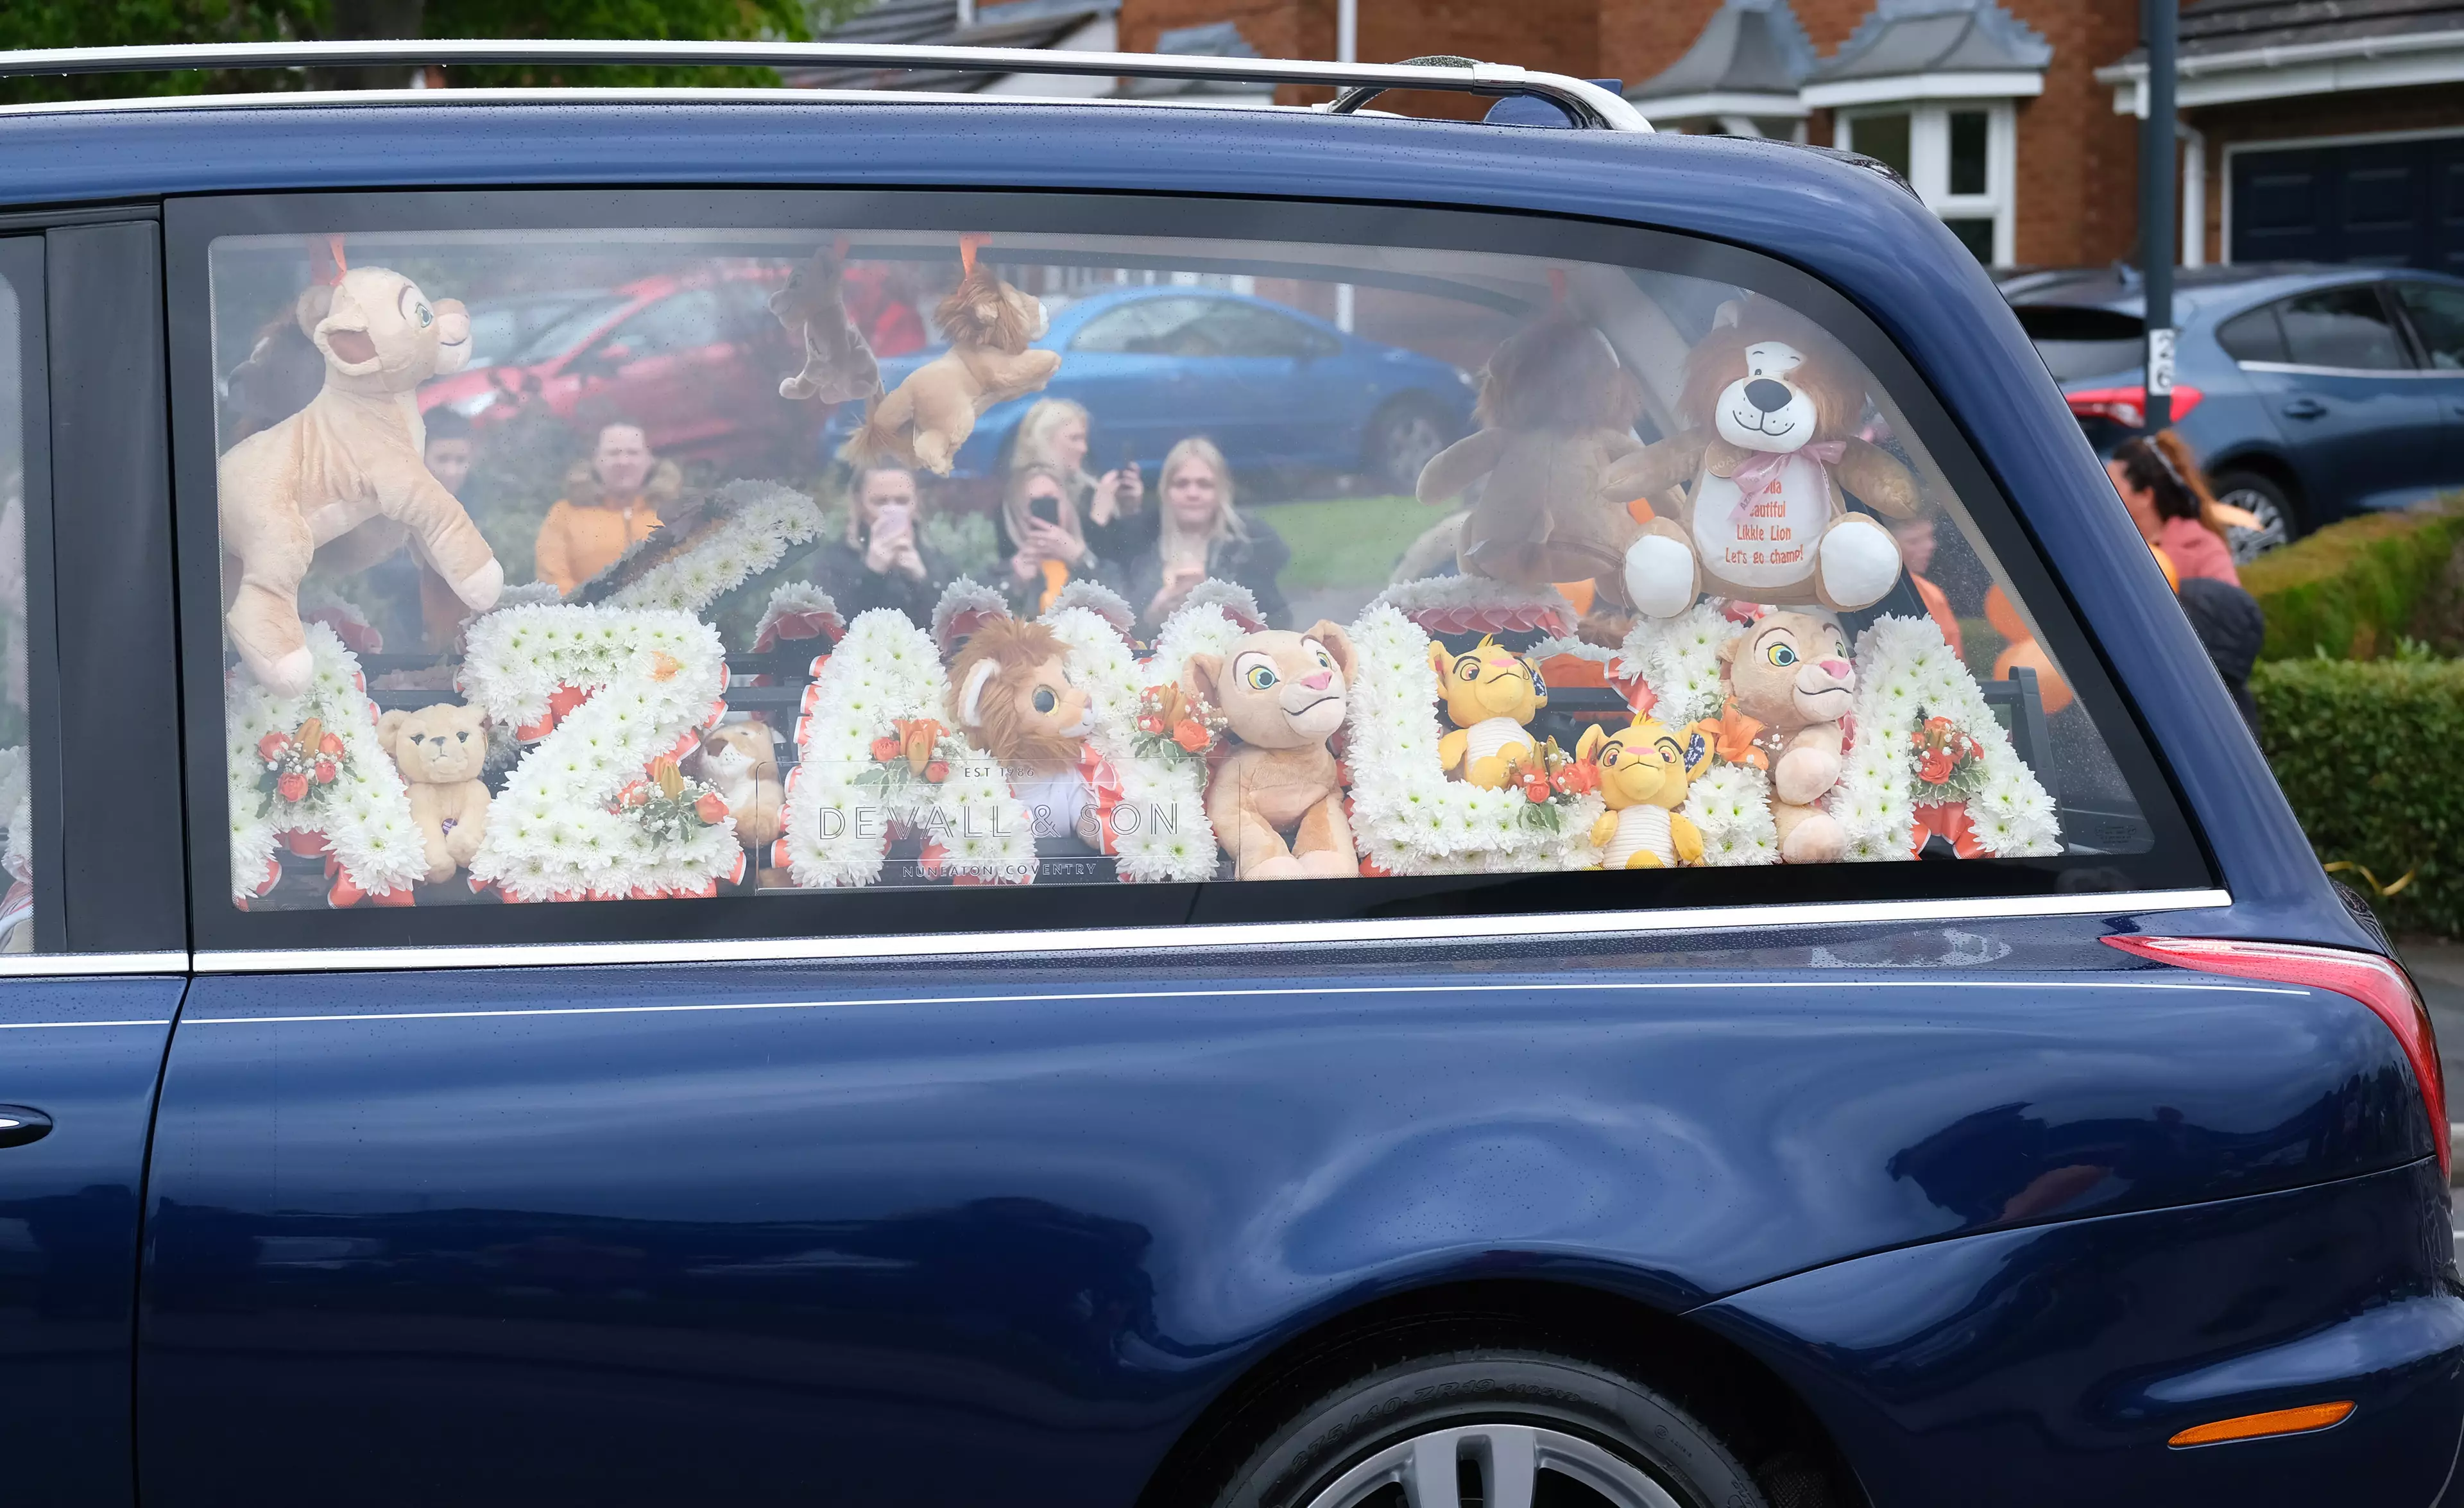 Azaylia's coffin was decorated with Lion King memorabilia (